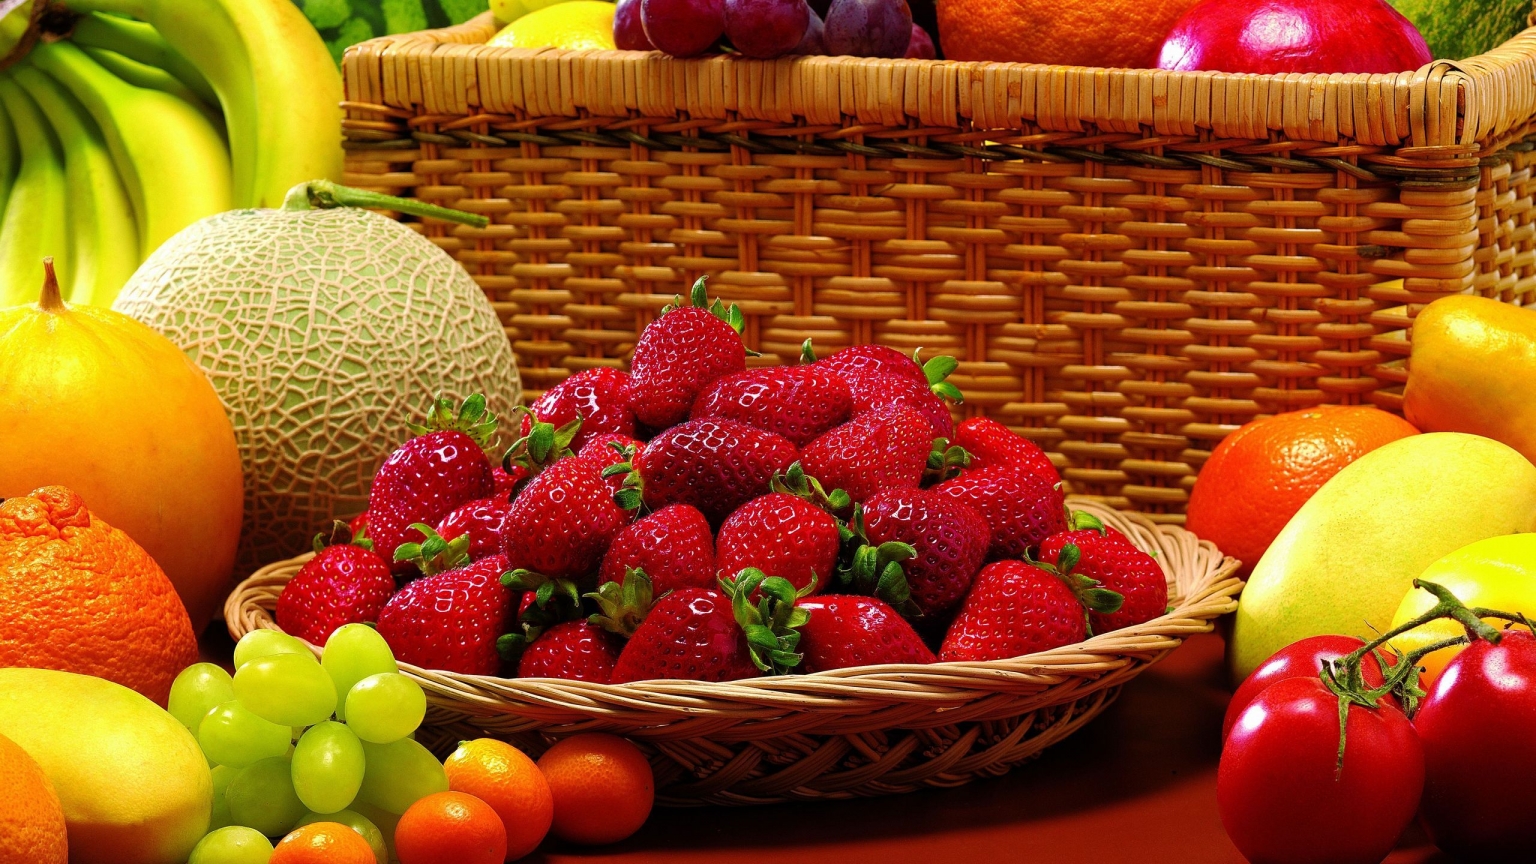 Amazing Fruits for 1536 x 864 HDTV resolution